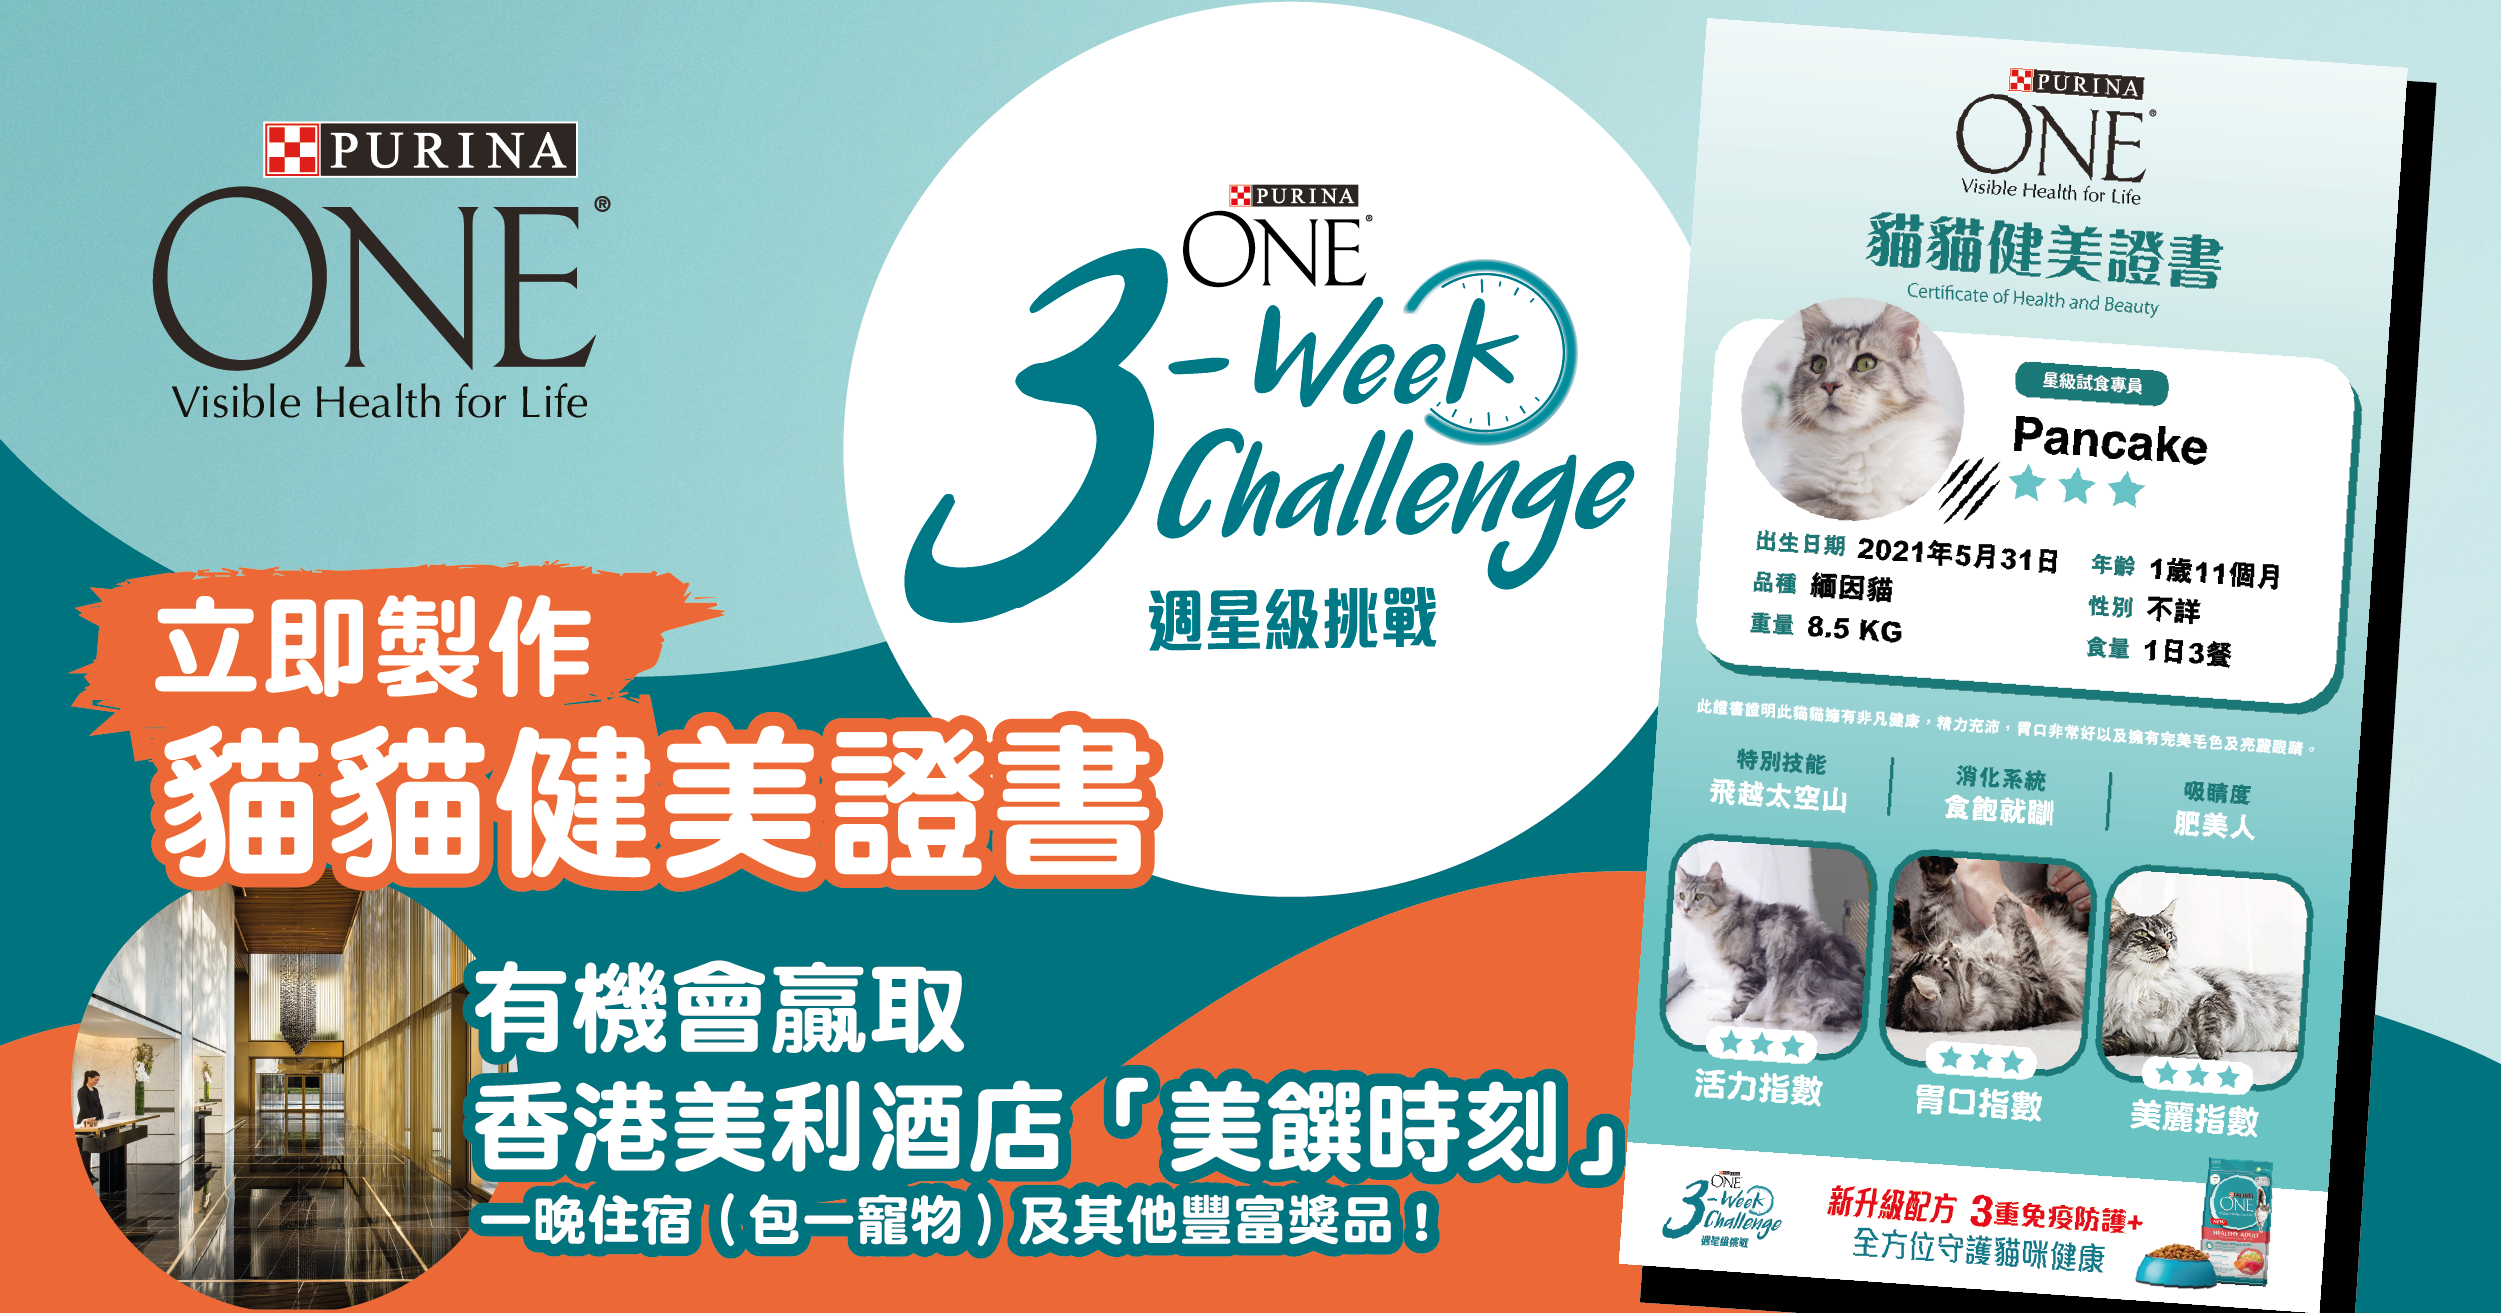 JOIN NOW | PURINA ONE® - 3 Weeks Challenge Chance to Win The MURRAY's Staycation